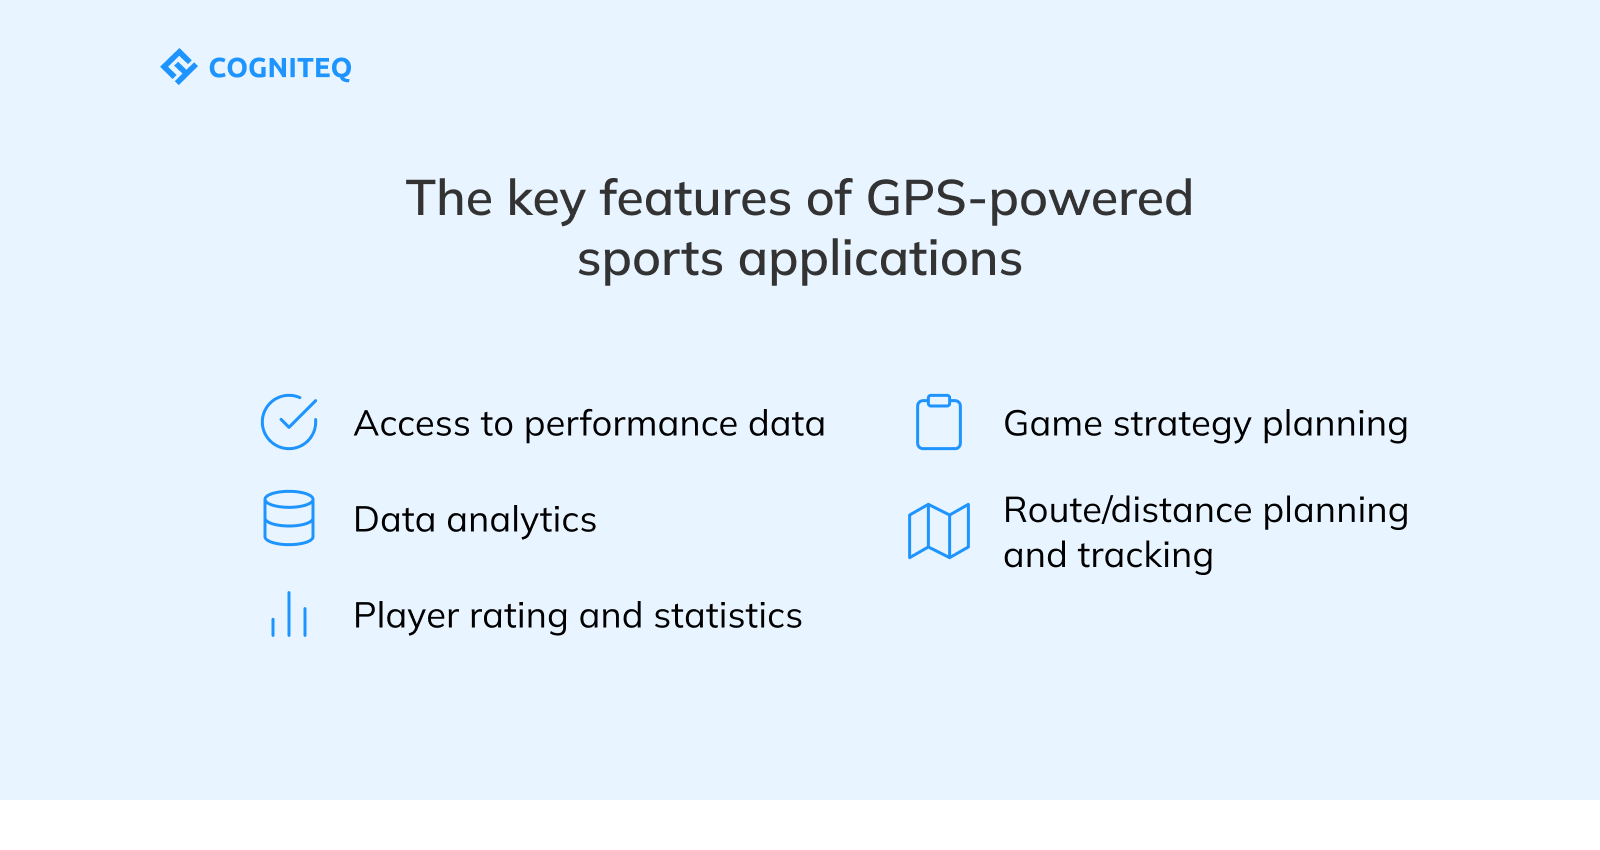 The key features of GPS-powered sports applications